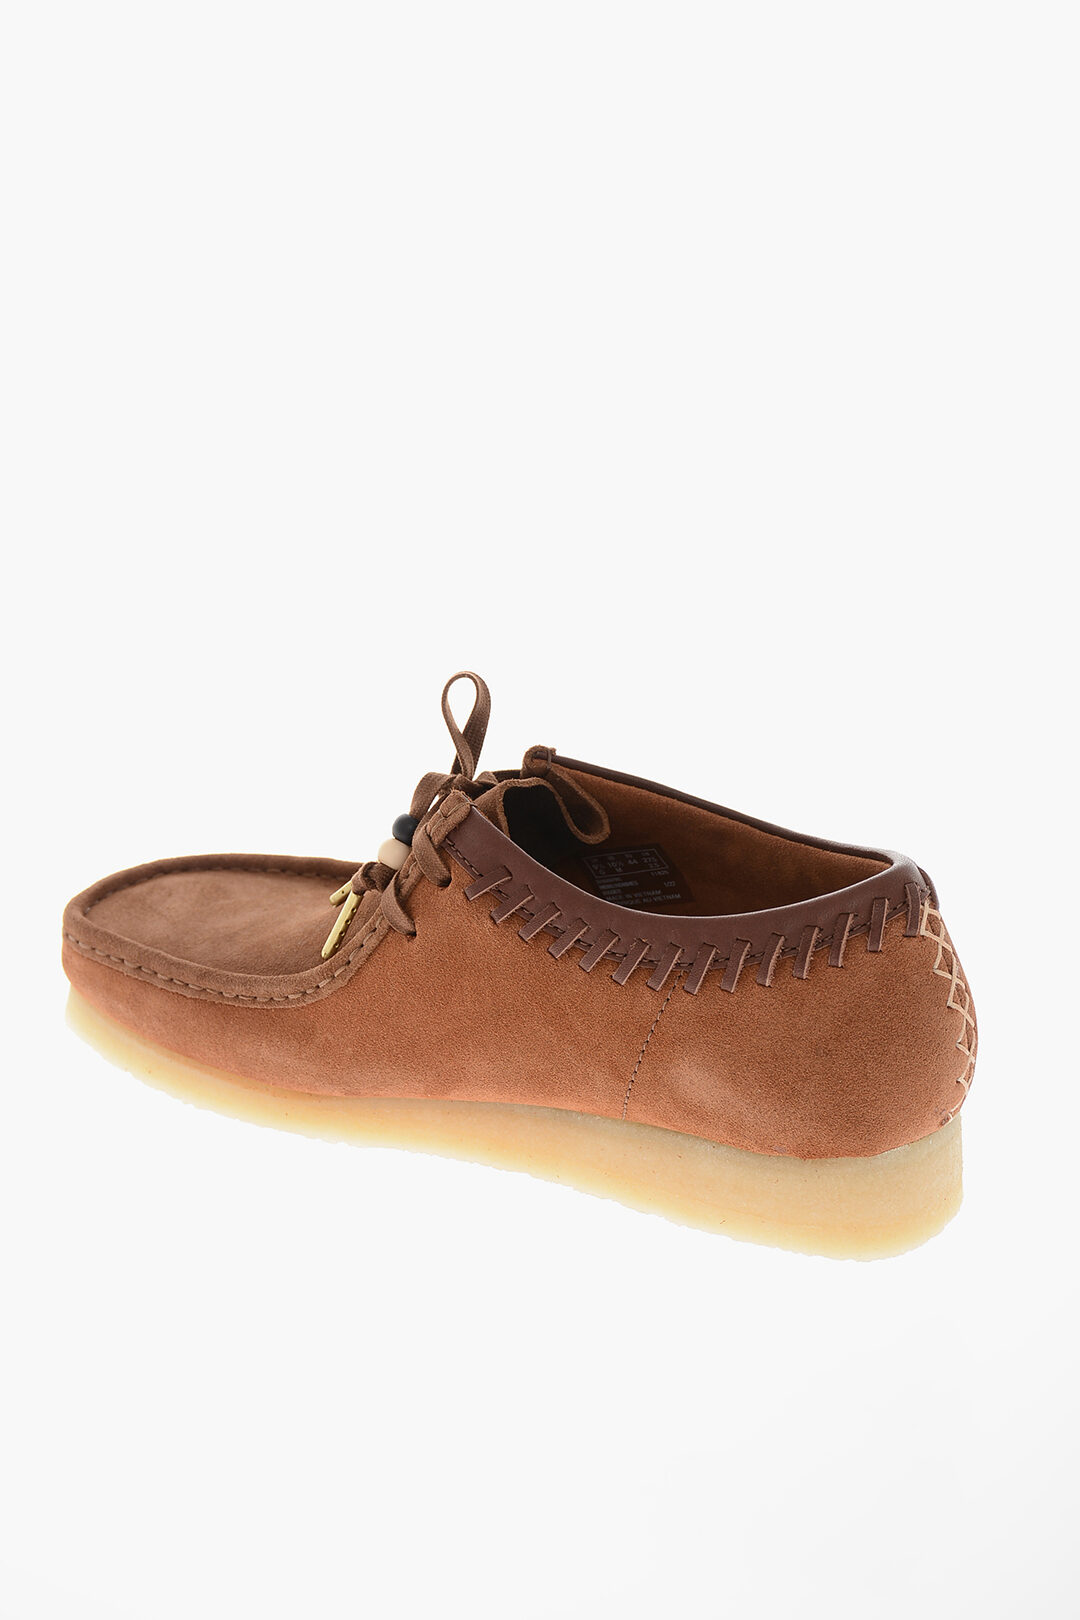 Clarks WALLABEE Desert with Crepe Sole men - Glamood Outlet